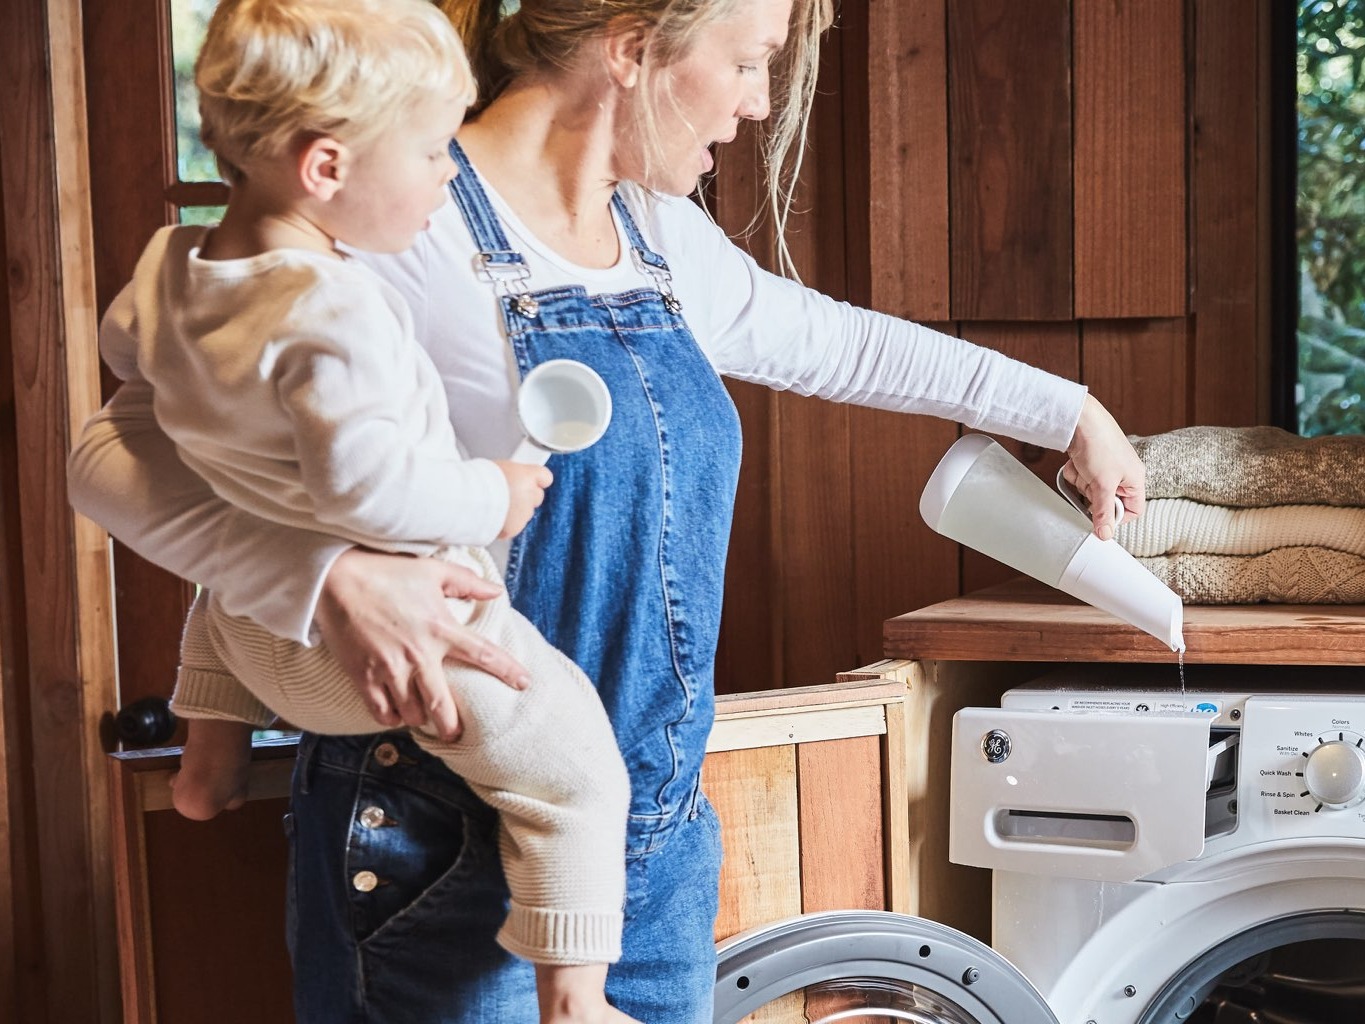 Adult holds a young child while they clean their front loading washing machine